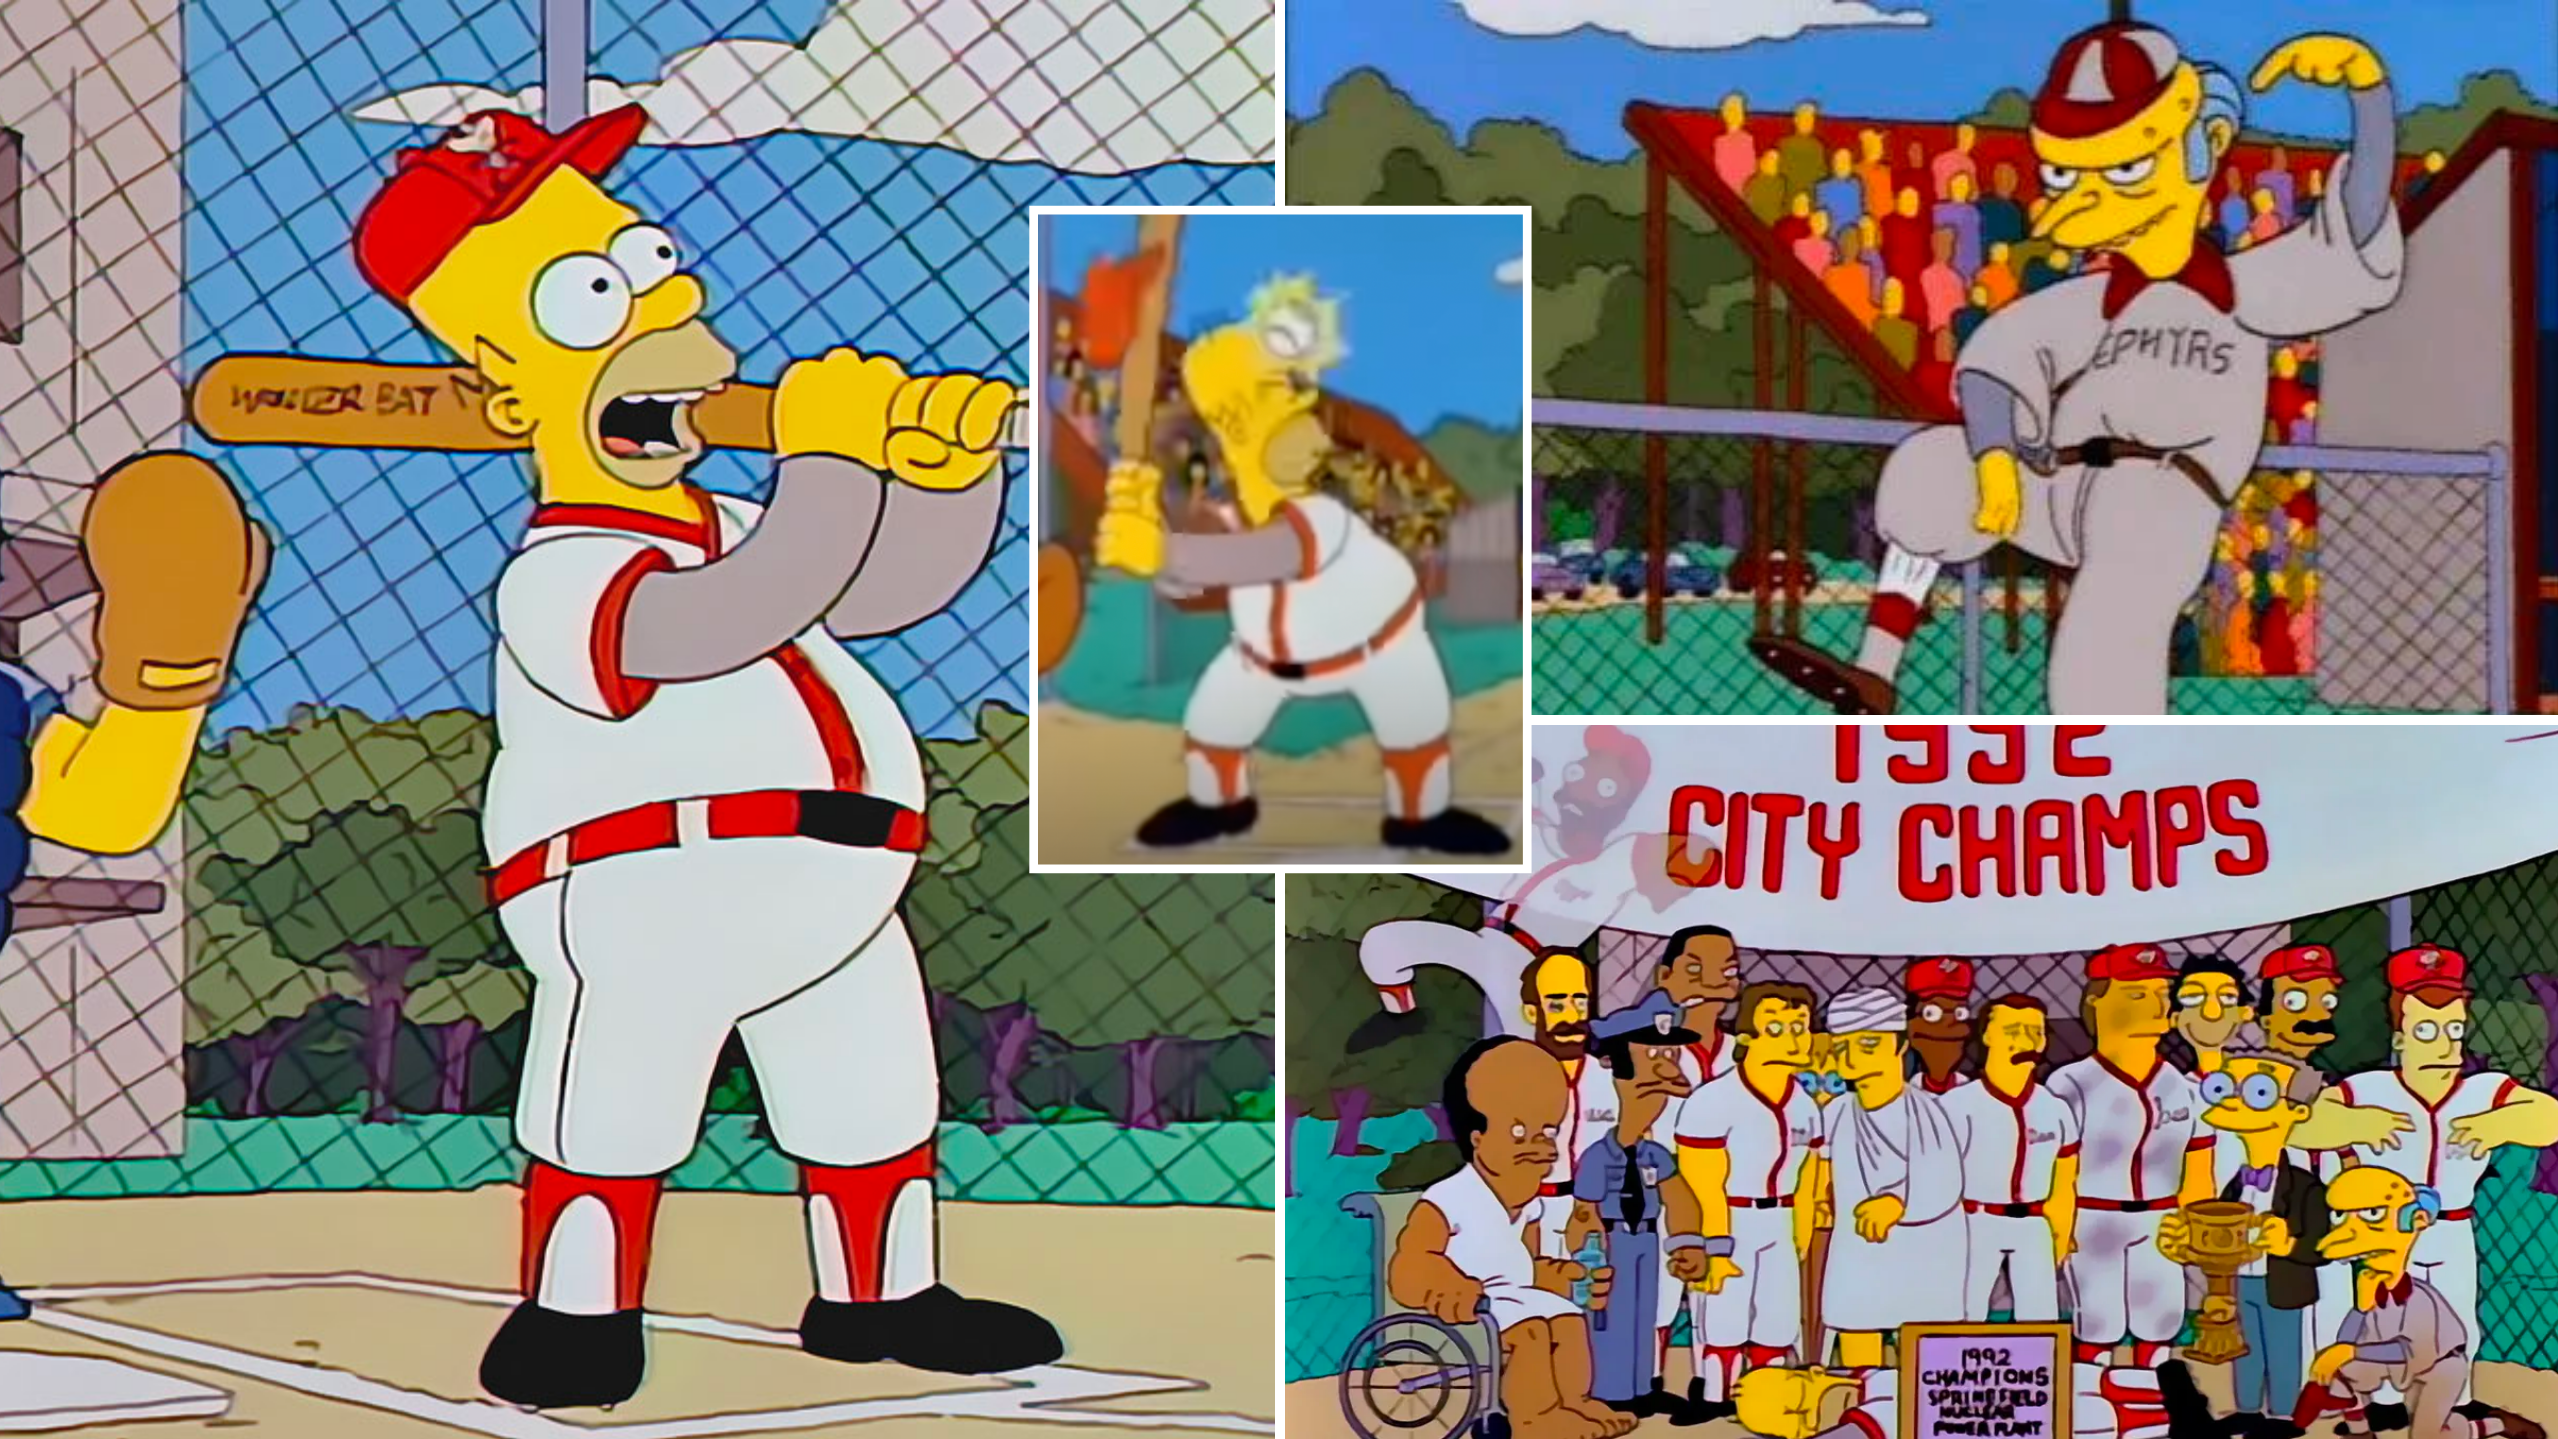 30 Years Ago, Homer Simpson Won The Softball Championship For The